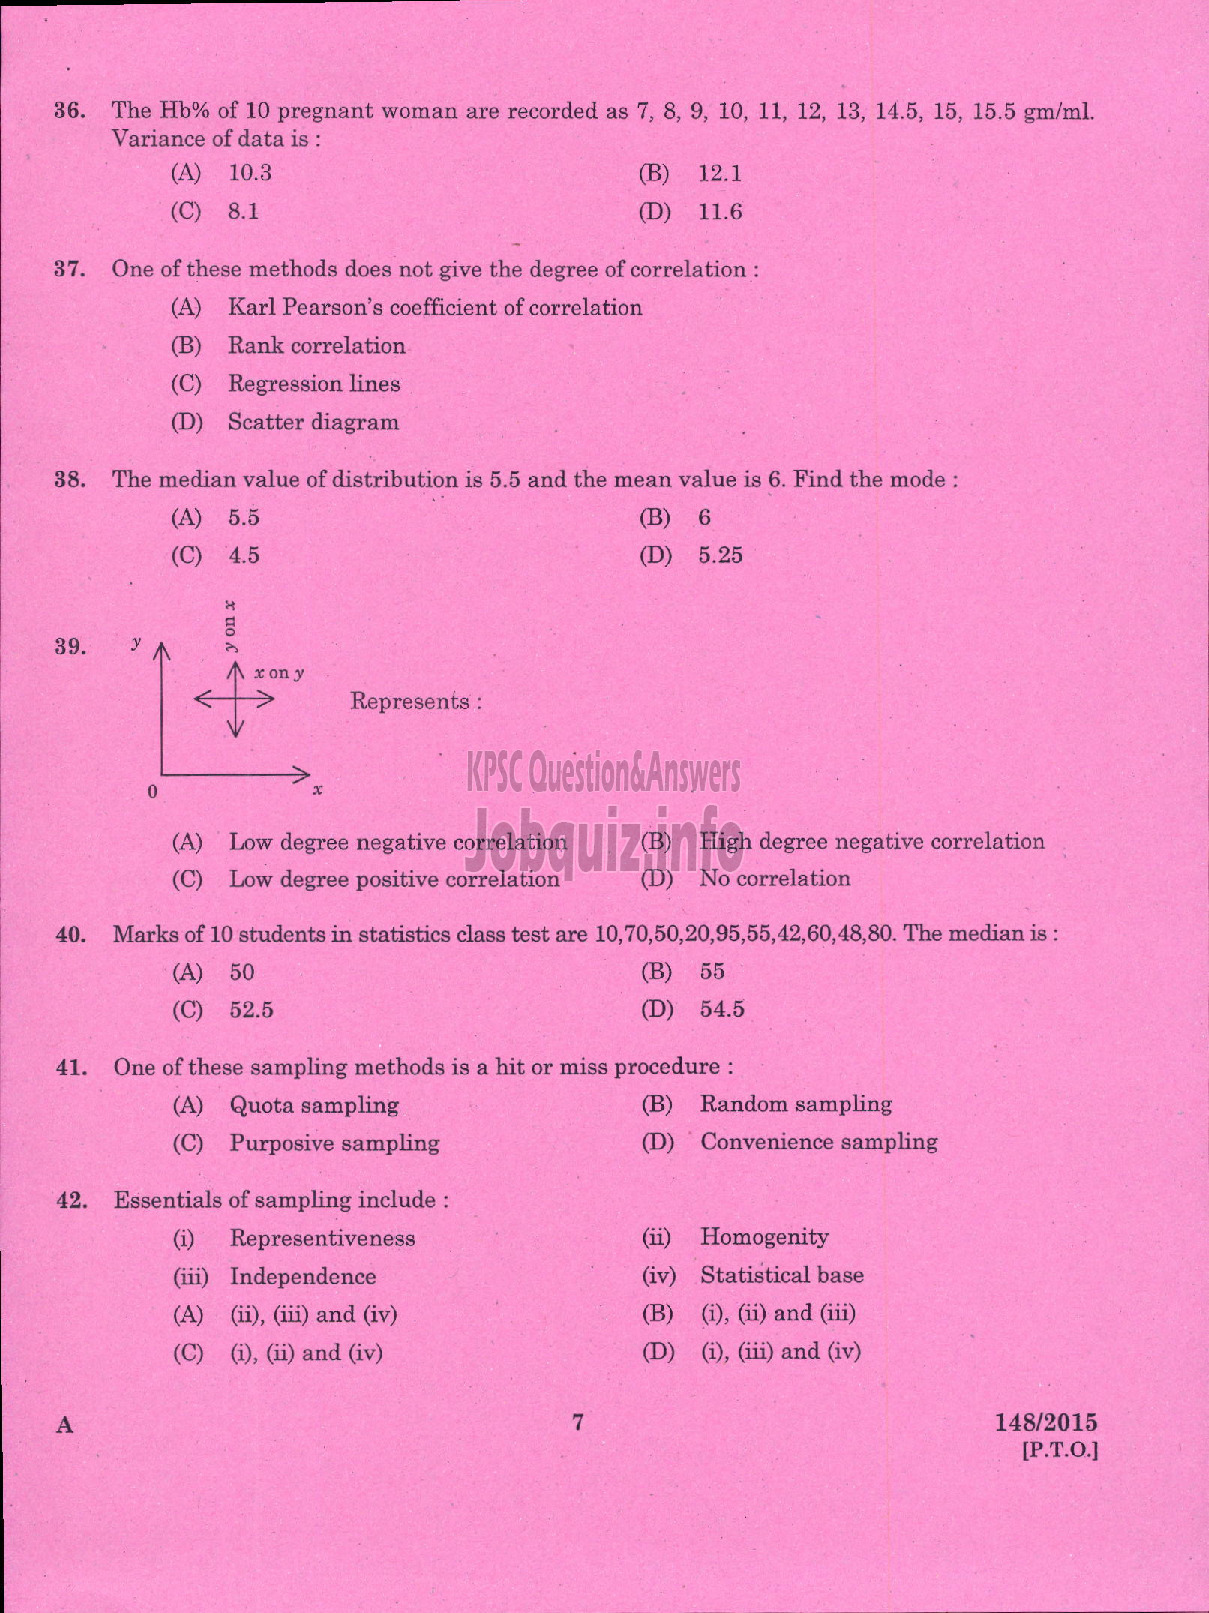 Kerala PSC Question Paper - LECTURER IN HOMESCIENCE FOOD AND NUTRITION COLLEGIATE EDUCATION-5